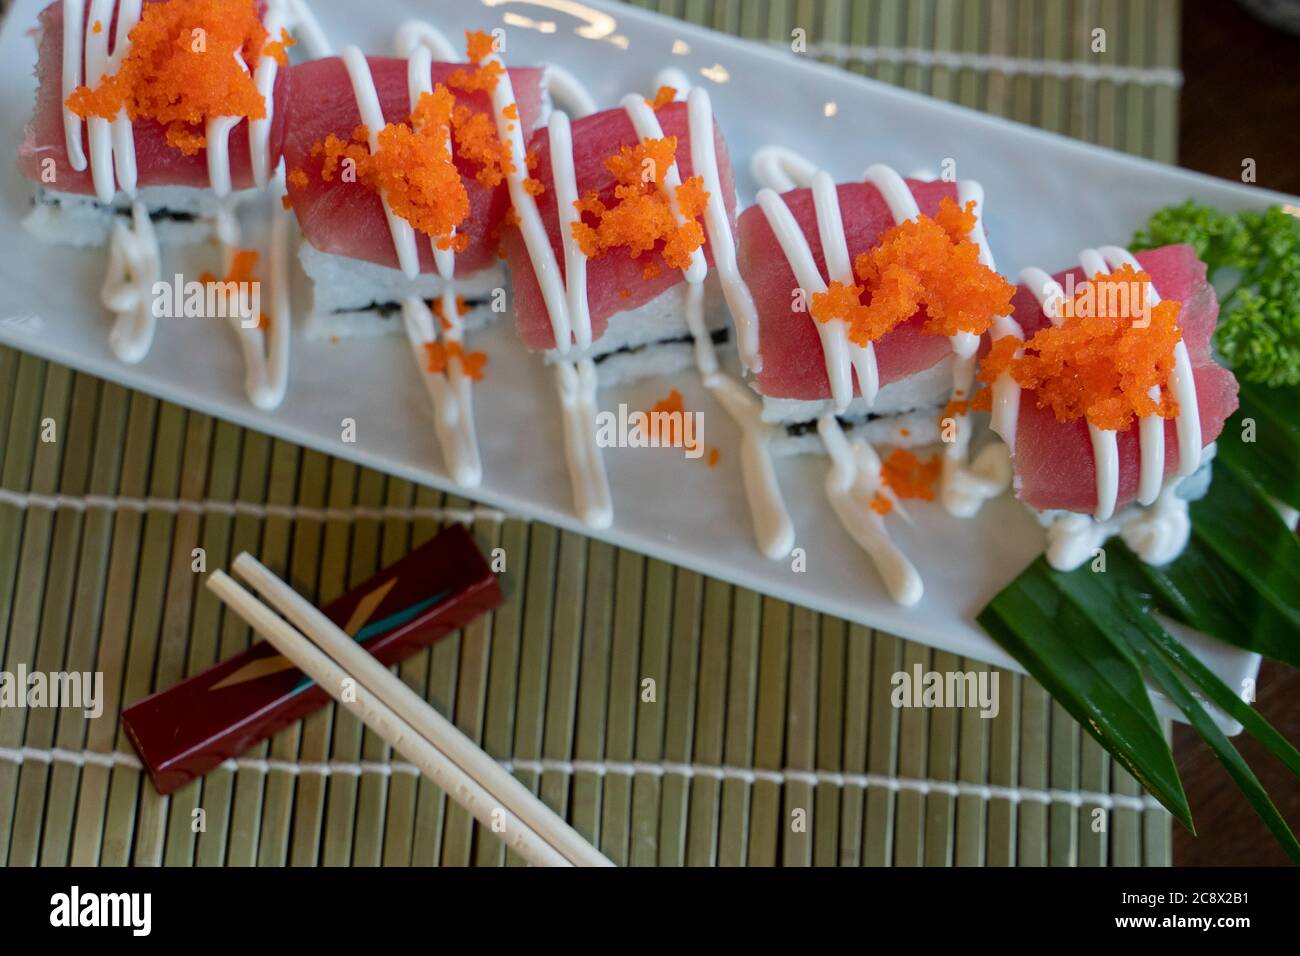 Cropped Image Sushi At Table. Stock Photo